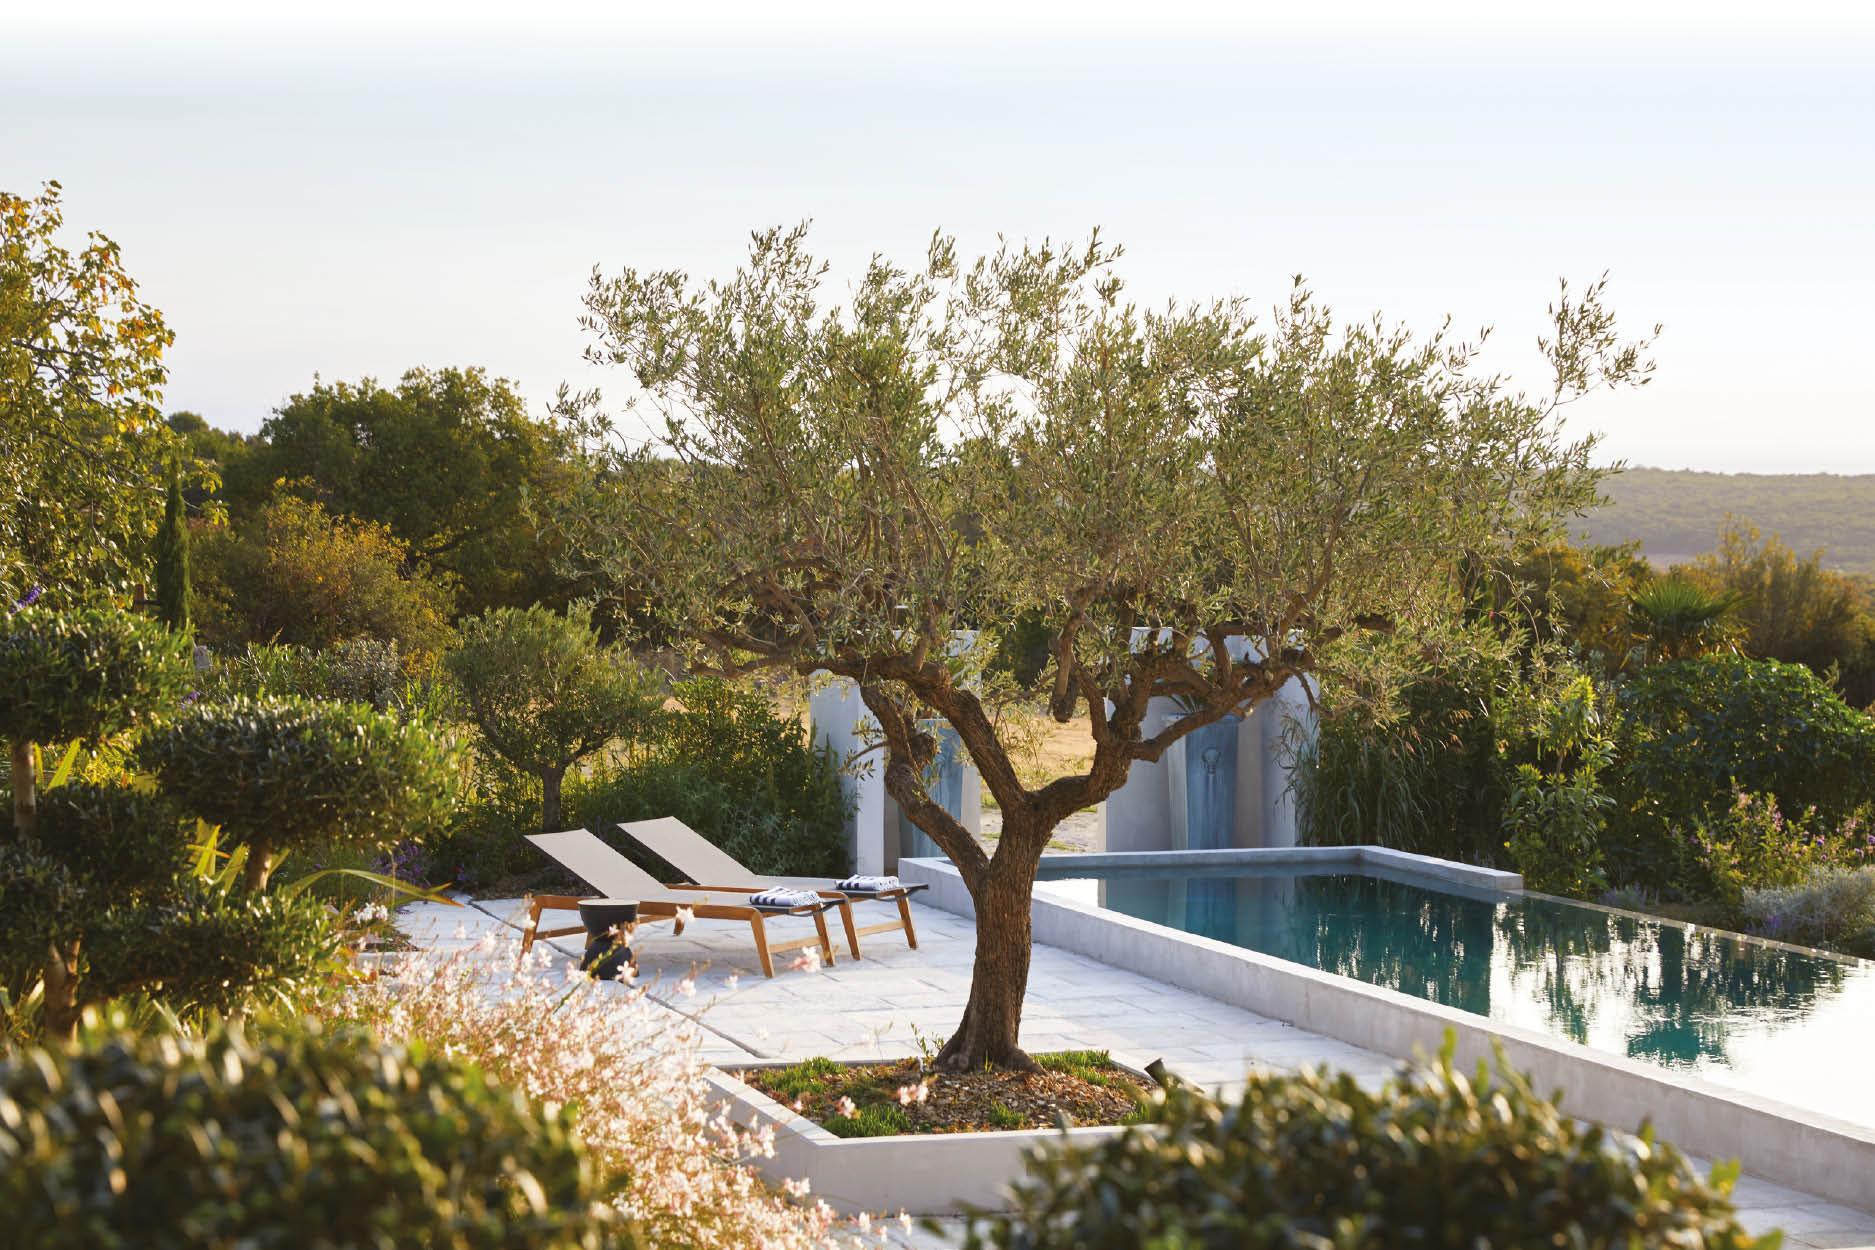 Step Inside a Designer Couple's Poetic Home in Provence